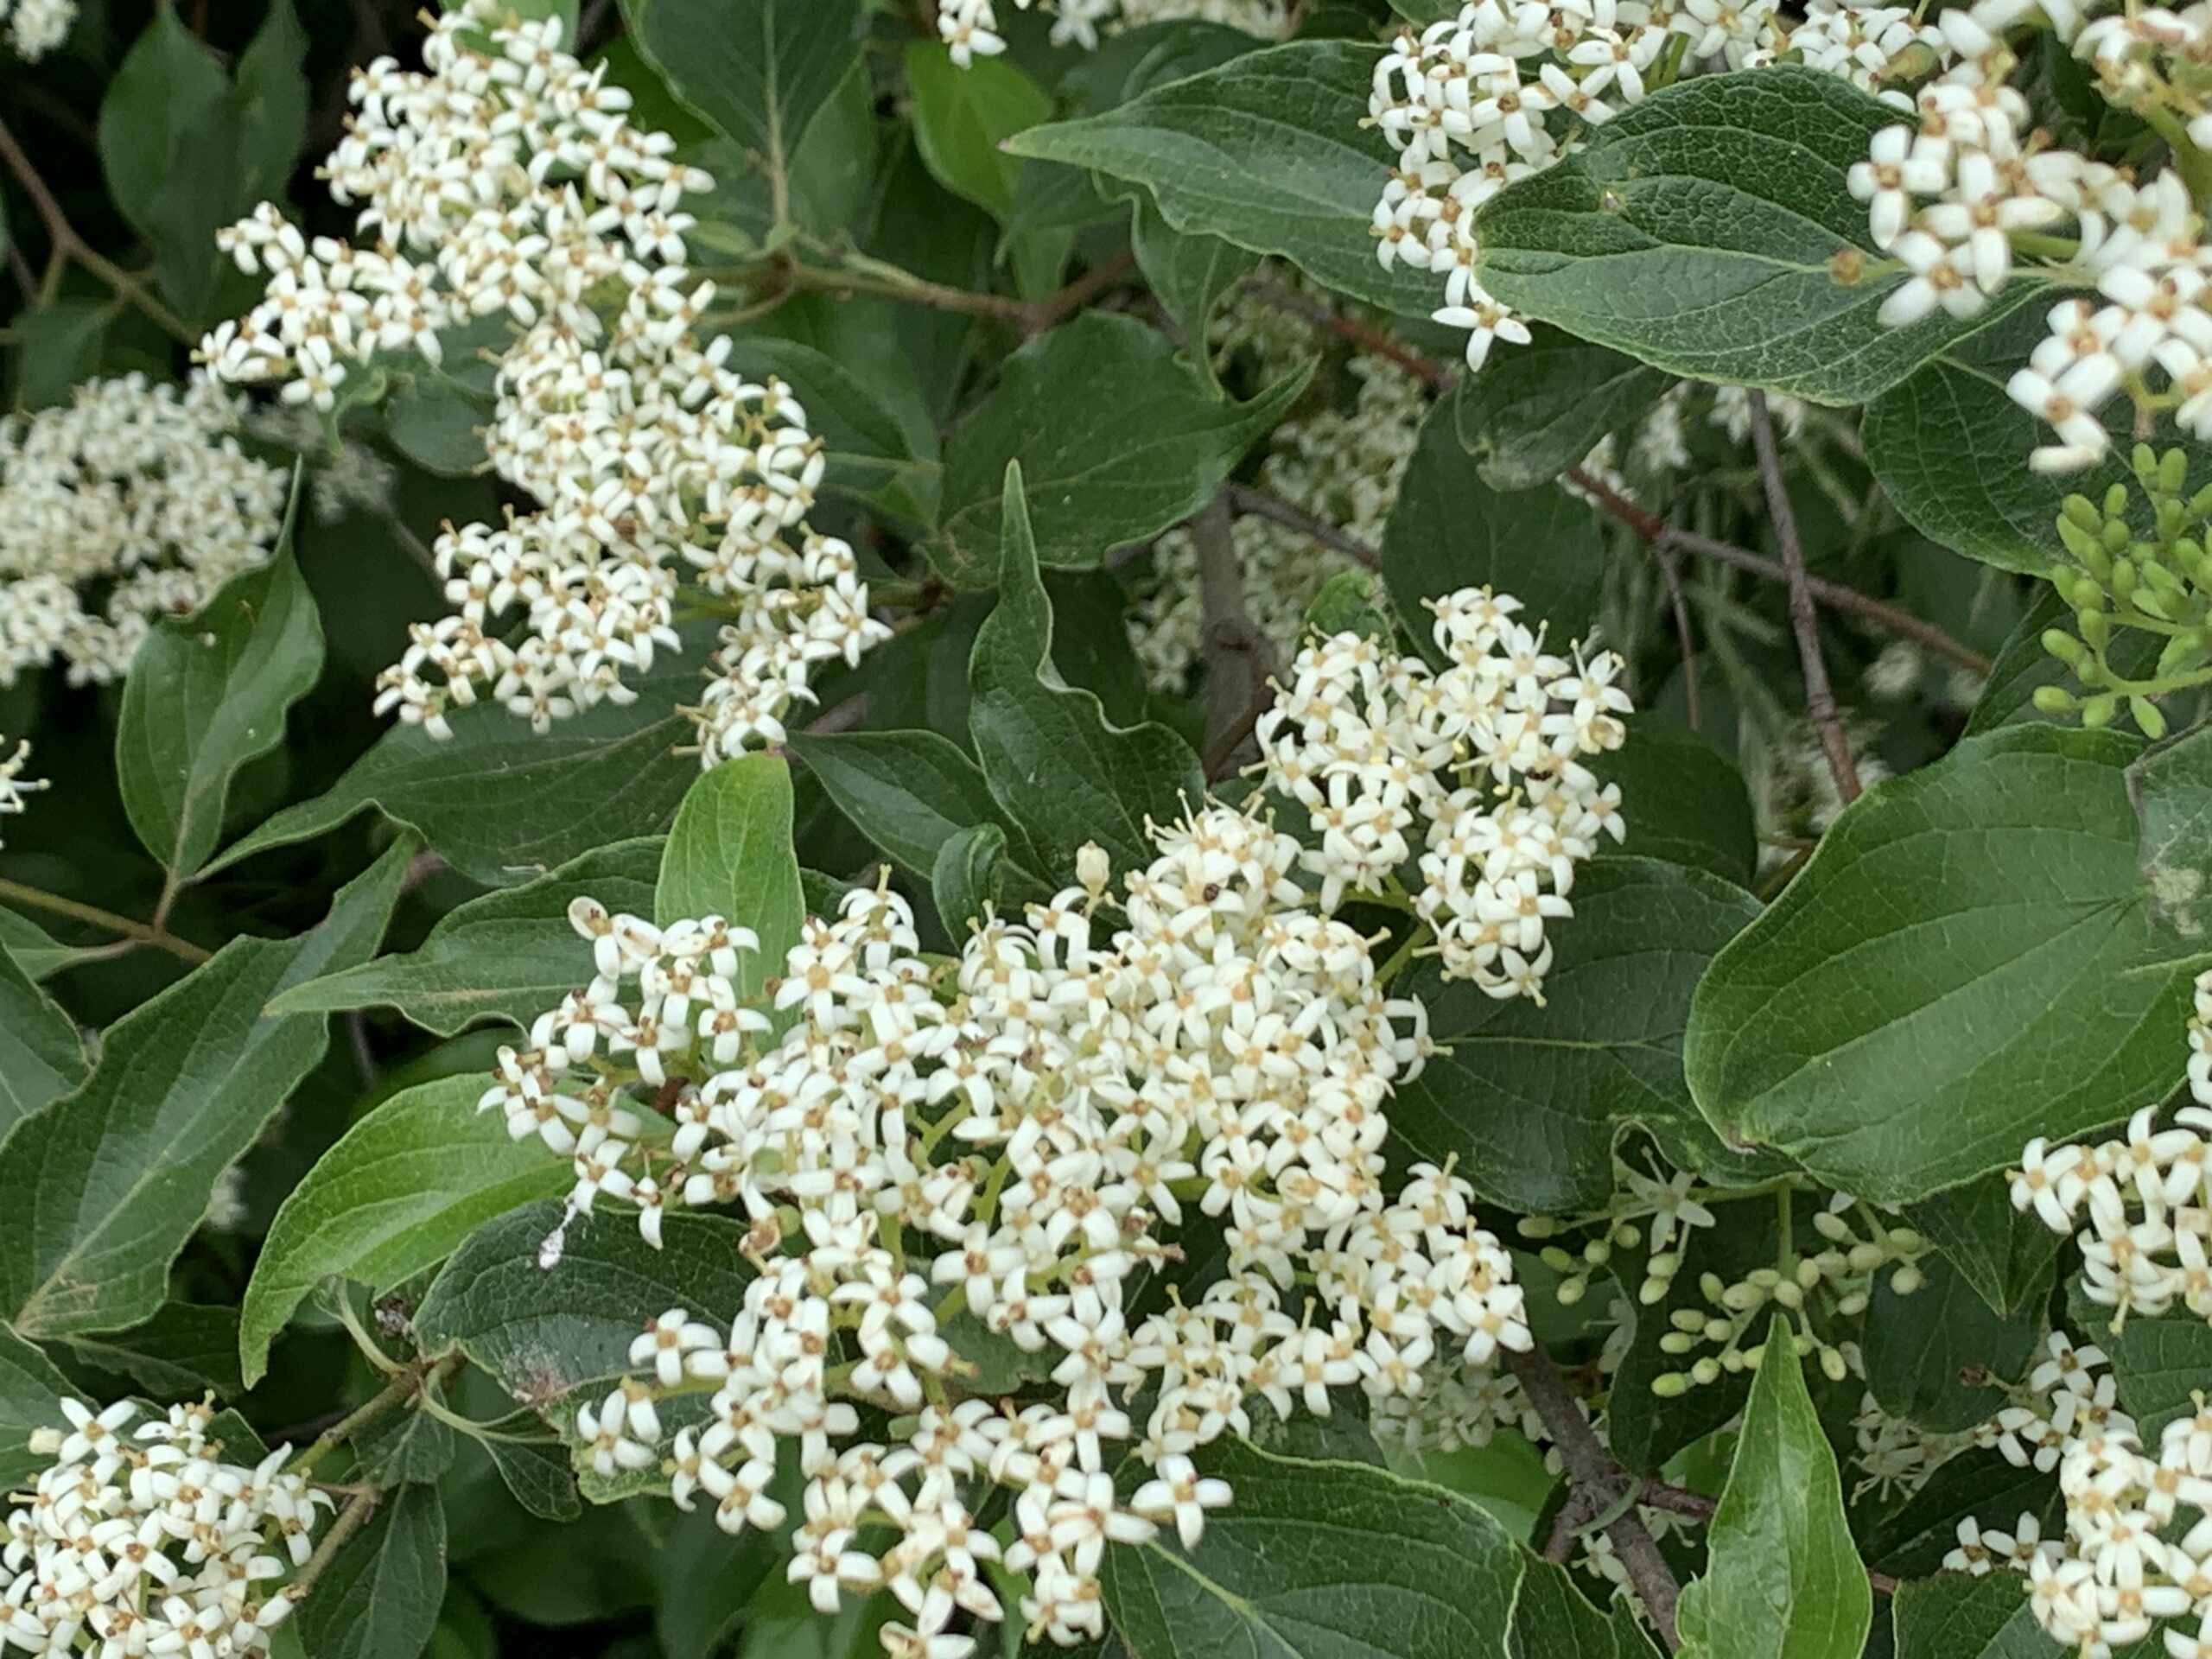 Dense clusters of tiny white flowers with yellow centers amid verdant, springtime foliage of Roughleaf Dogwood.